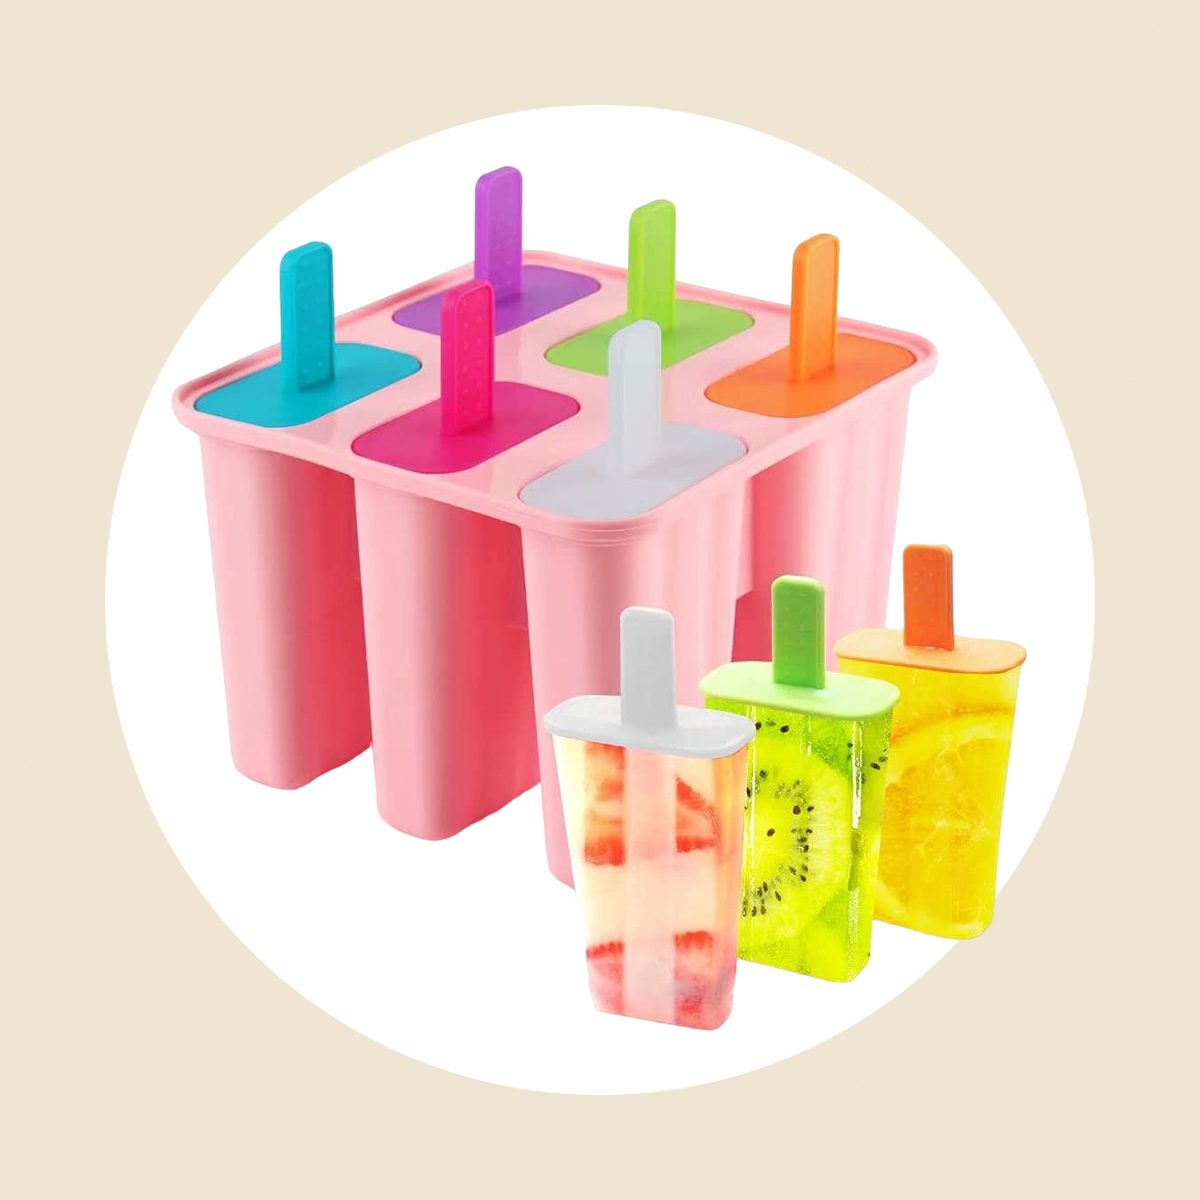 8 Popsicle Molds to Make Your Own Summer Sweet Treat